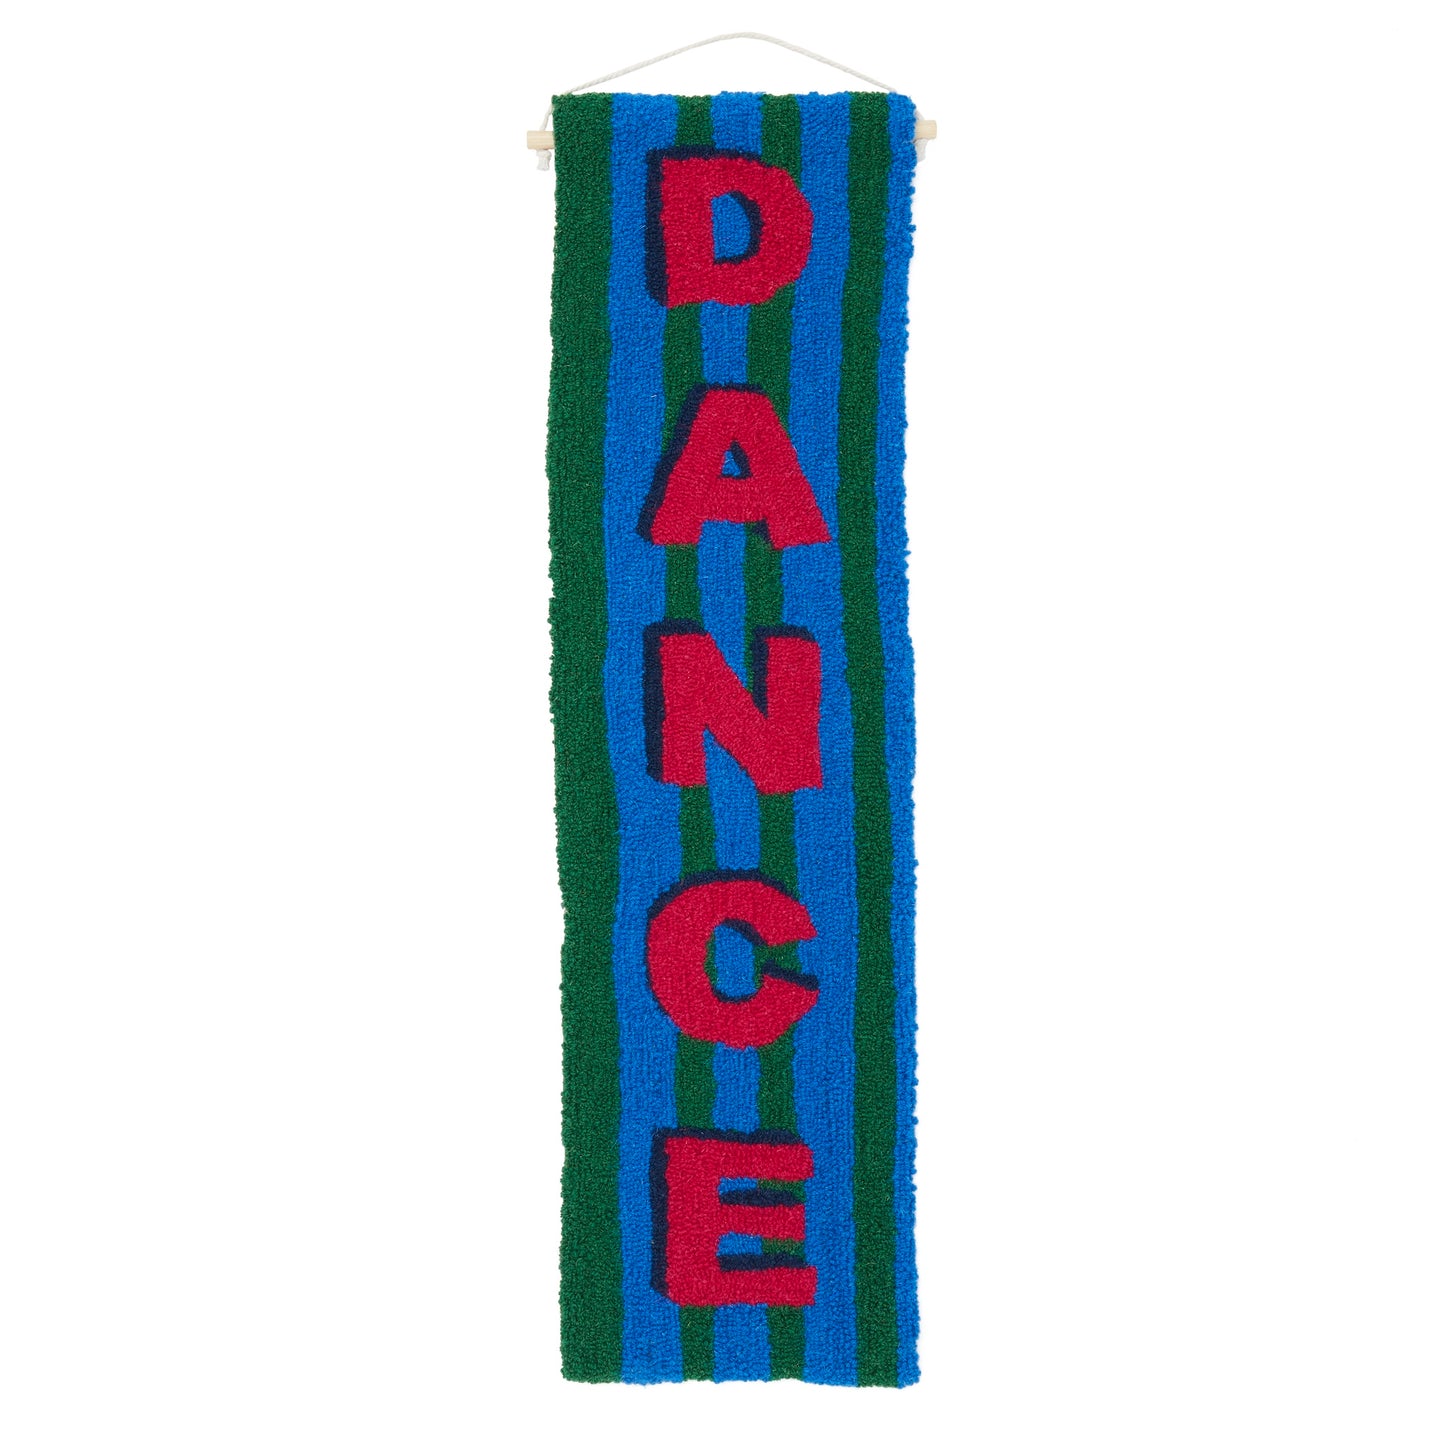 DANCE in a bold shadow text in Magenta, Navy and Bright Blue and Green Stripe background in a loop pile using reclaimed yarn. 